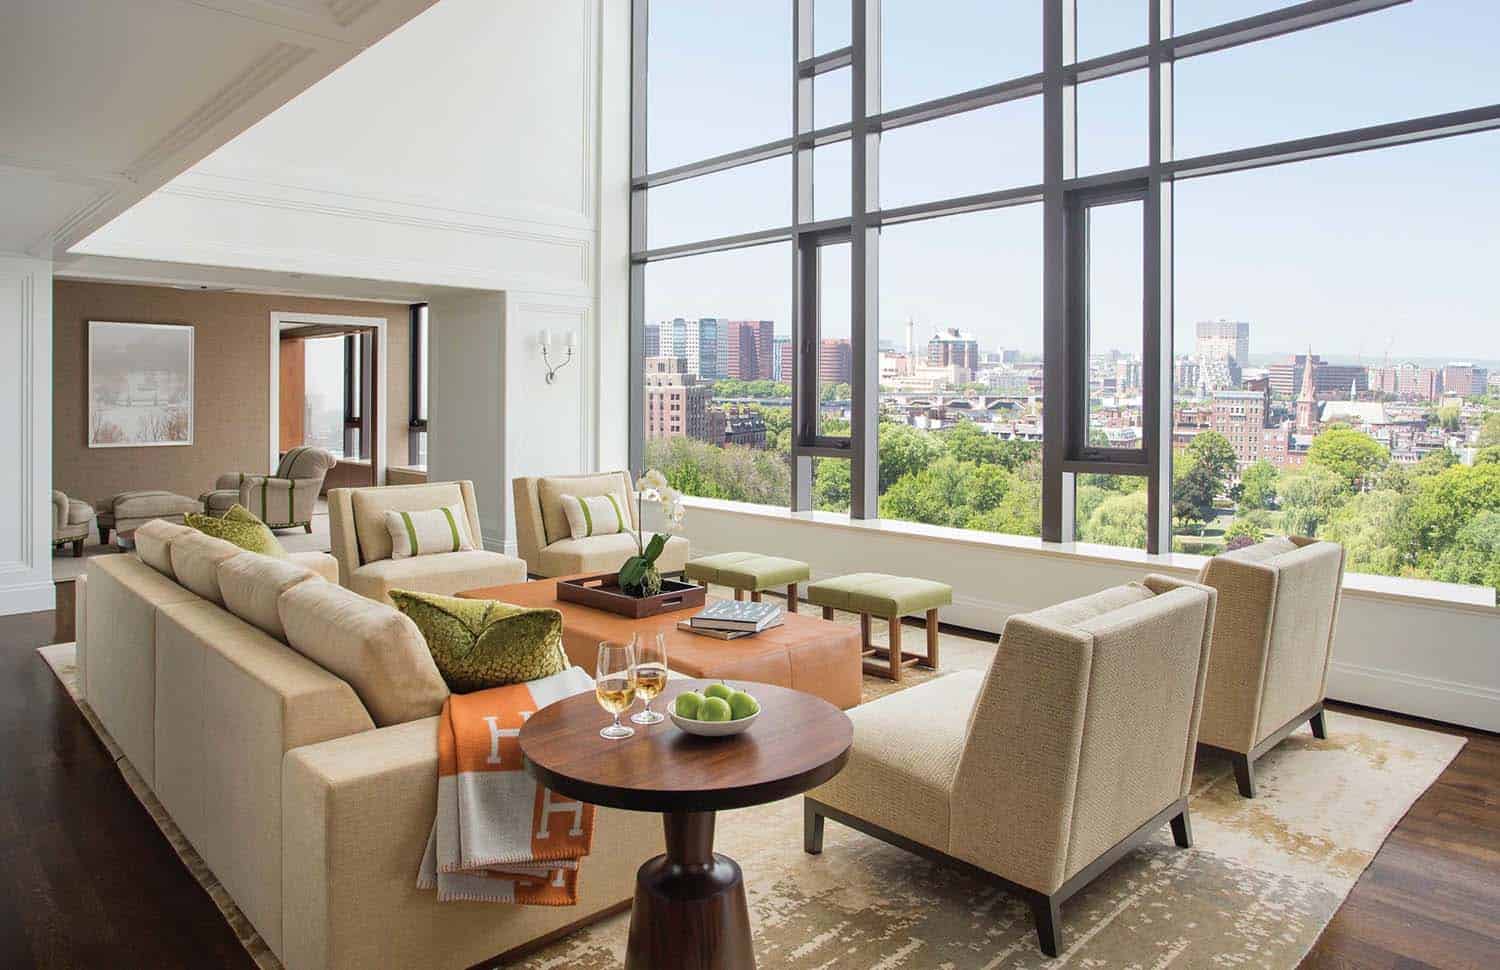 Two-story Beacon Hill penthouse boasting gorgeous interiors